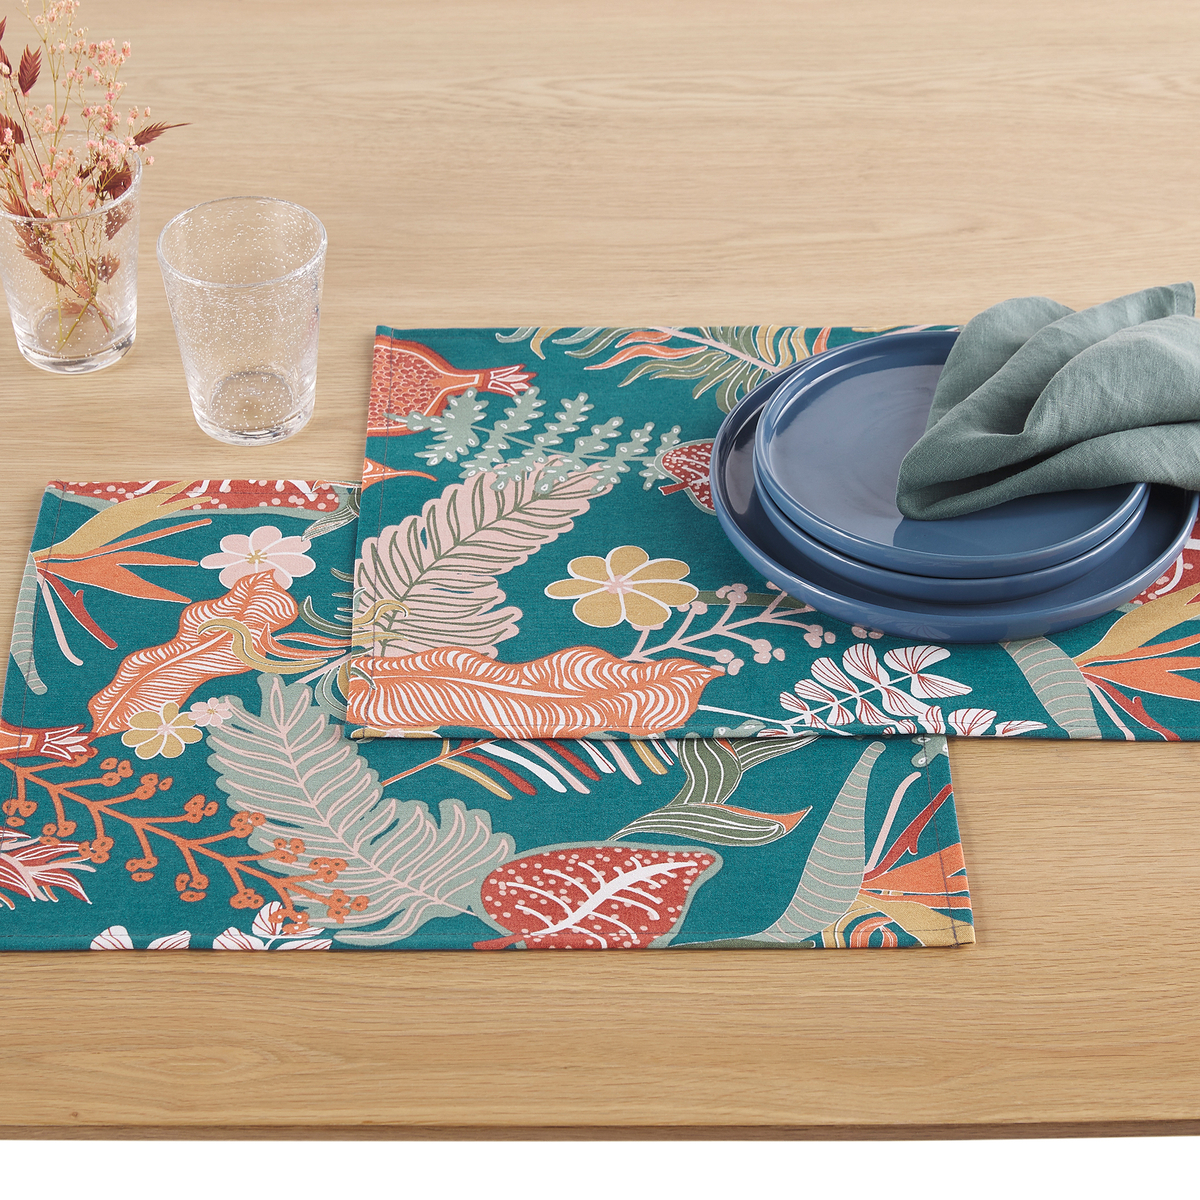 Set of 2 Tropic Printed Anti-stain Placemats